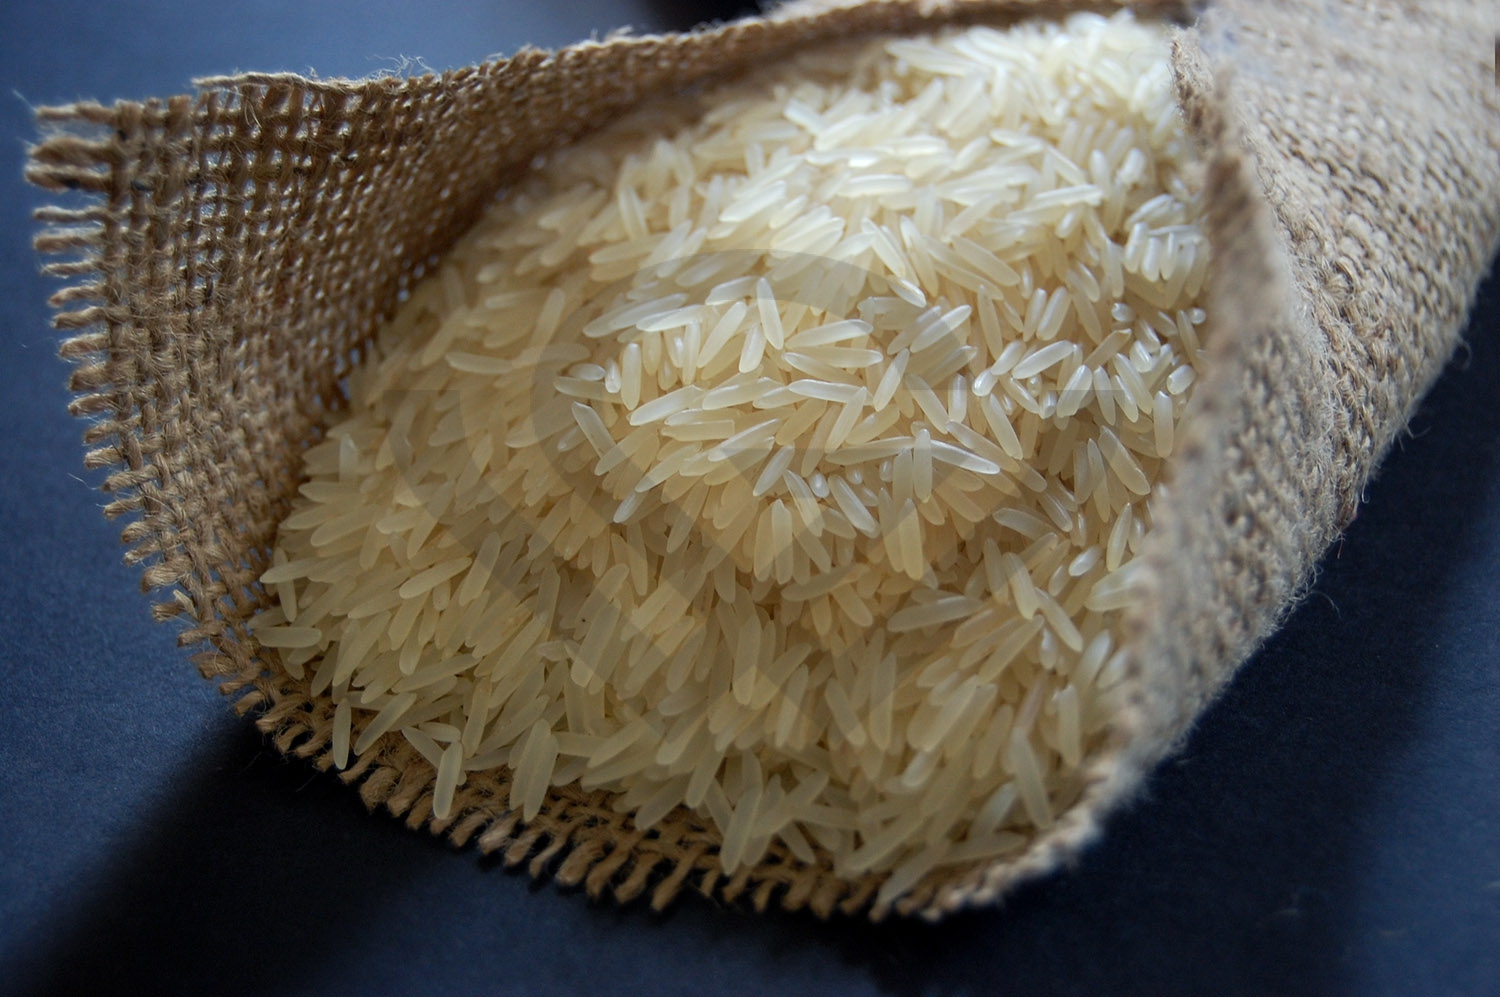 Product image - Rice is Pakistan's third largest crop in terms of area sown, after wheat and cotton. Pakistan is a leading producer and exporter of Basmati and IRRI rice (white long grain rice).
Pakistani aromatic basmati RICE is finest bread appreciated worldwide. Our company bears the capacity of exporting all types of basmati rice produced in Pakistan as per customers demand. 